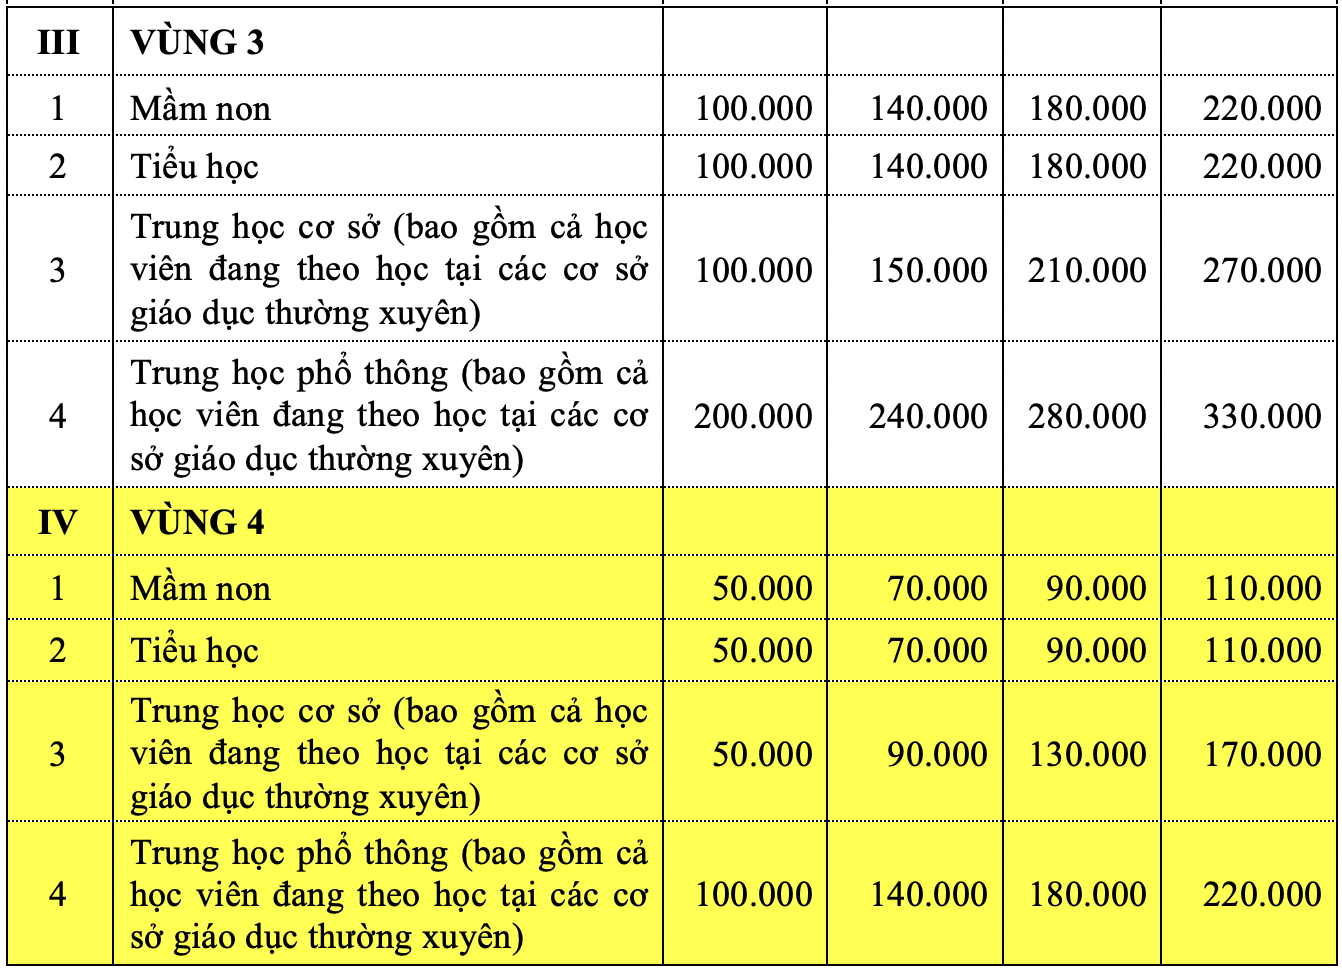 Hanoi expects the school year 2022-2023 to double and gradually increase - Photo 2.